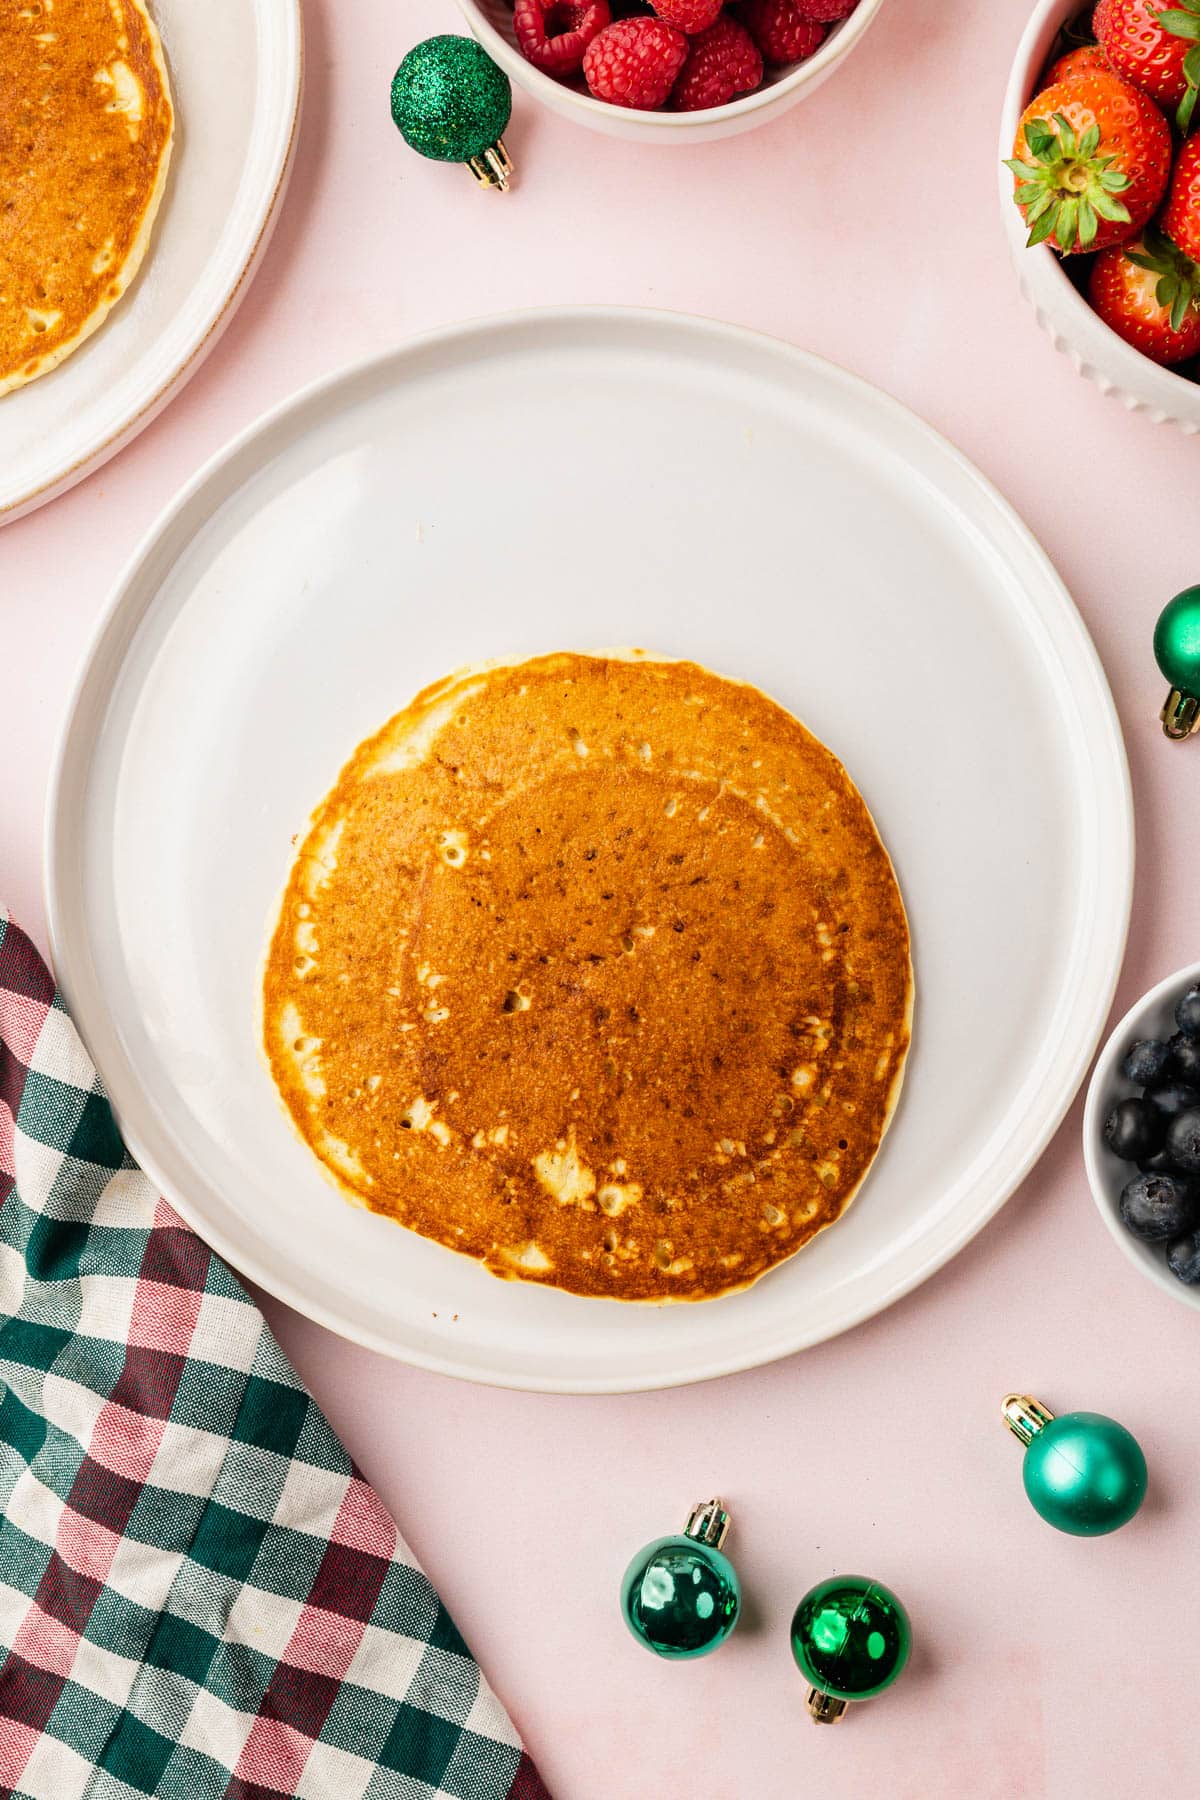 A single large pancake on a plate surrounded by bowls of berries and ornaments.